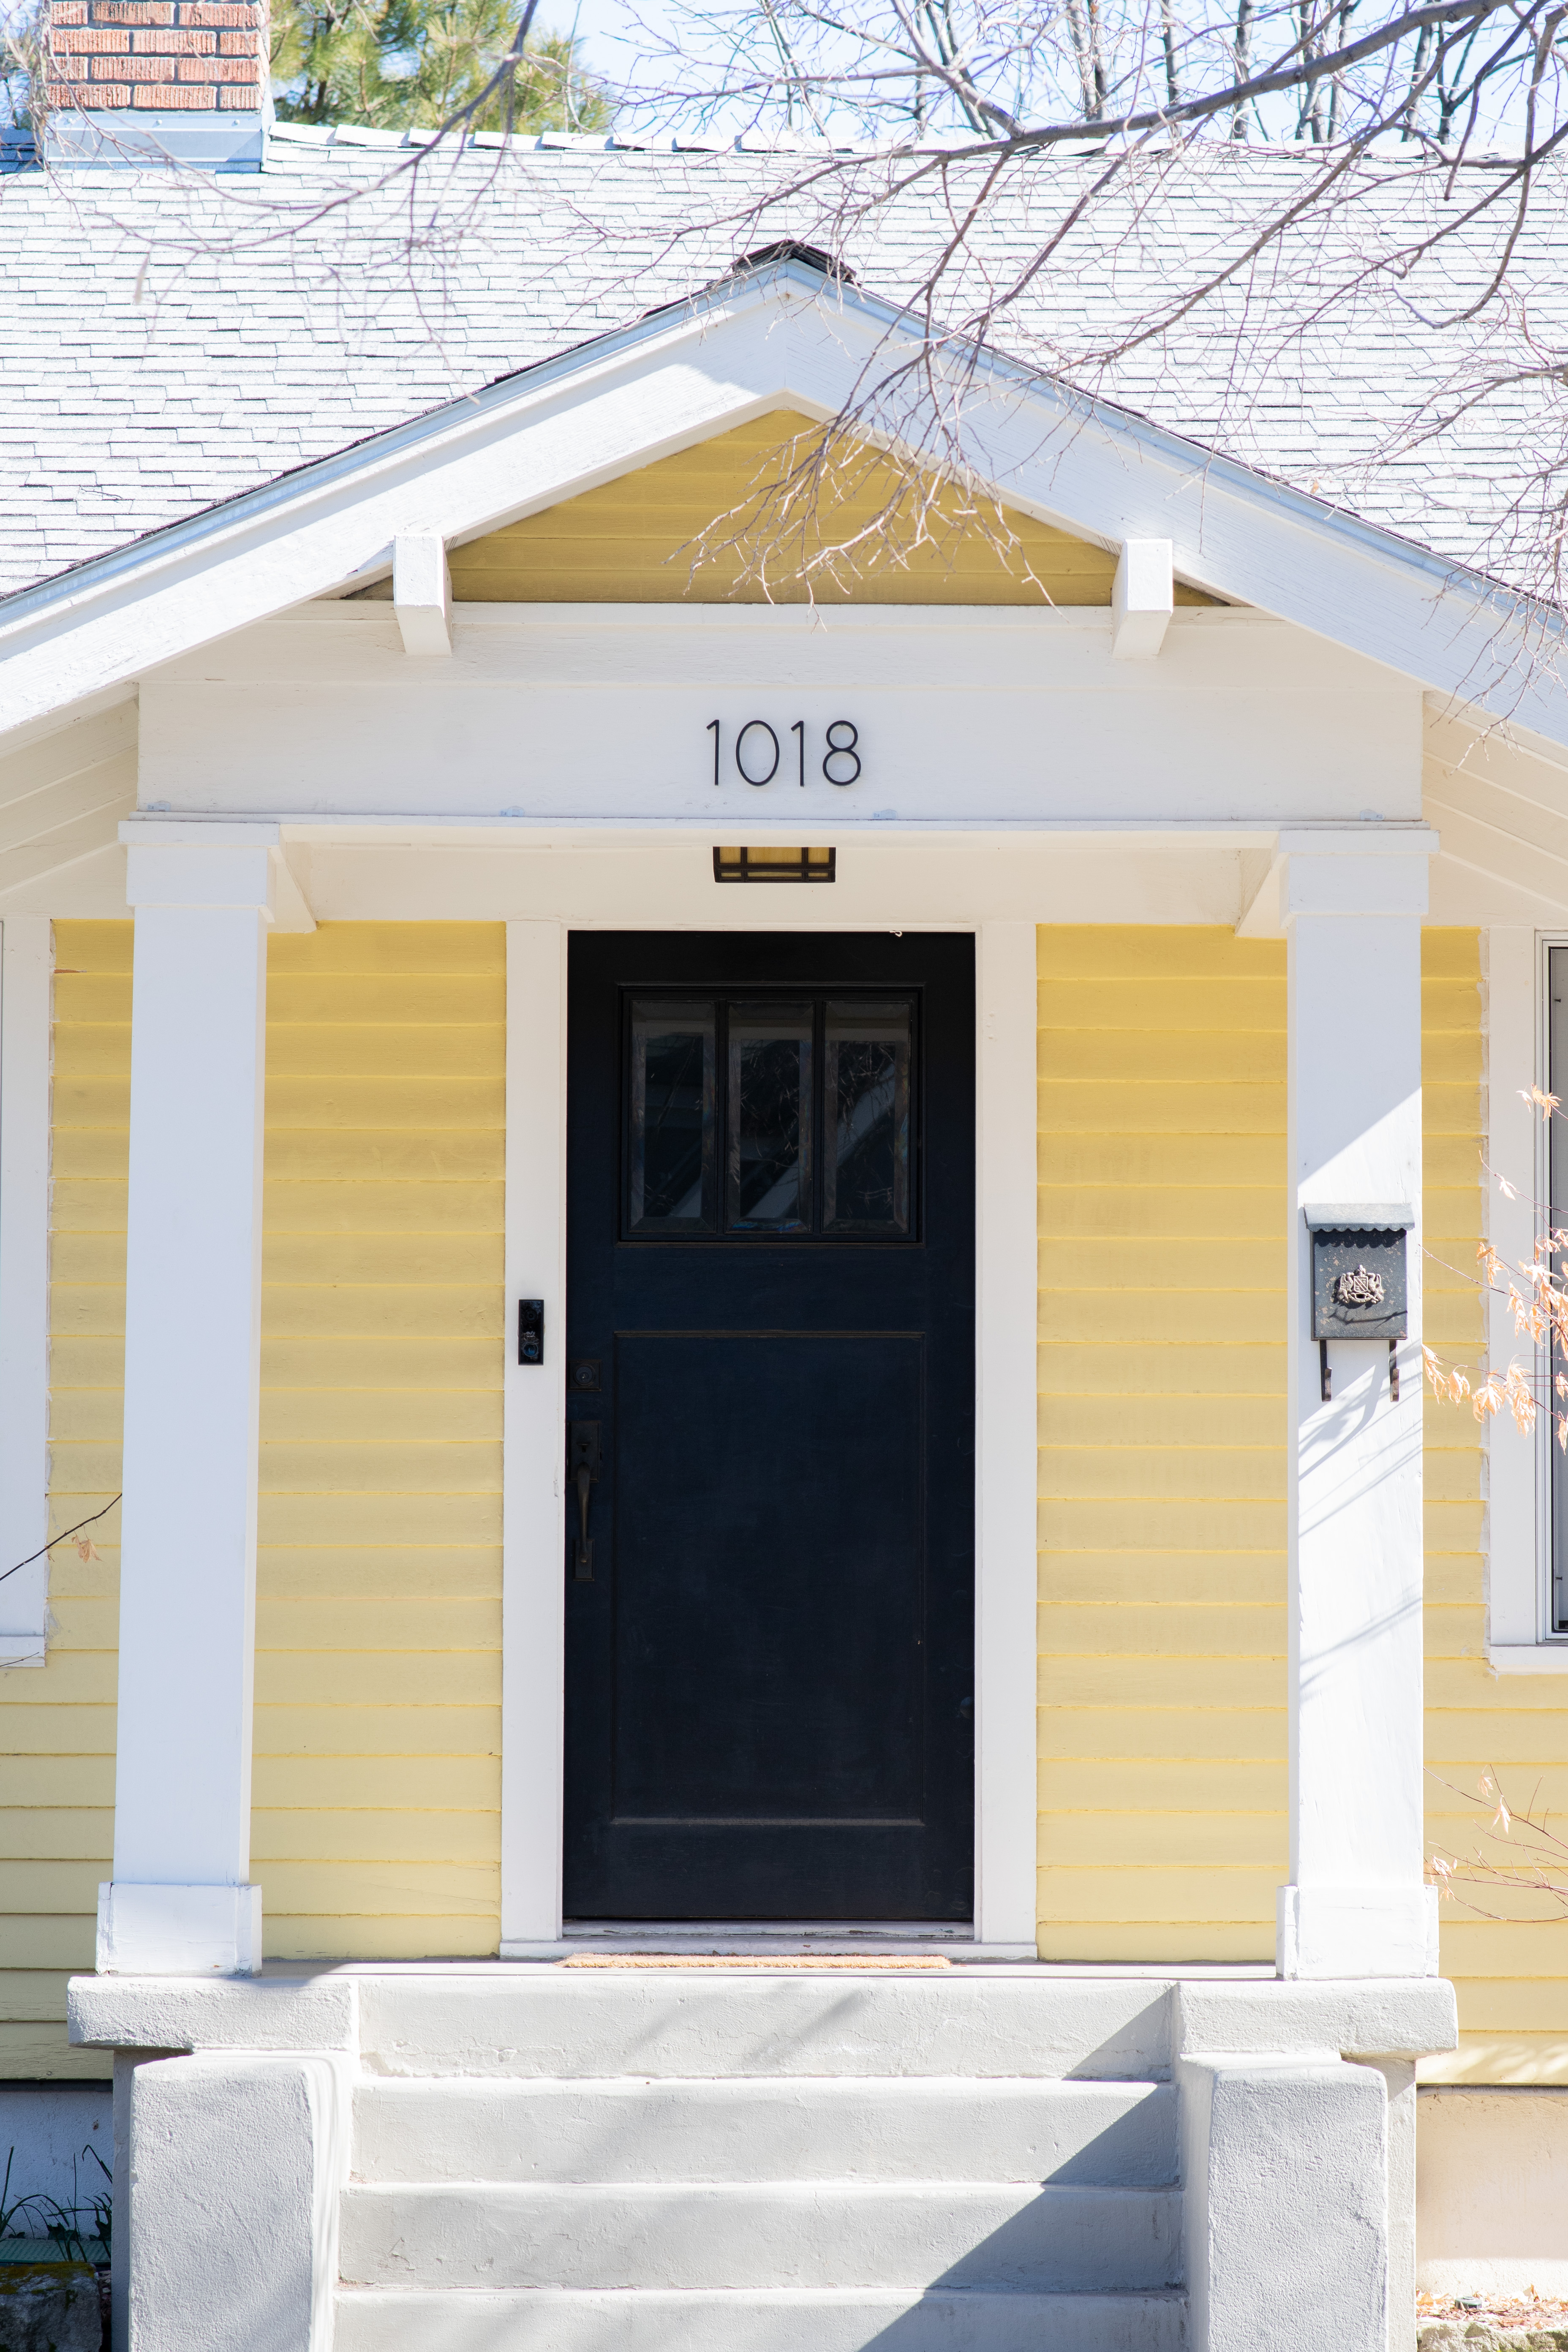 A black door on a yellow house